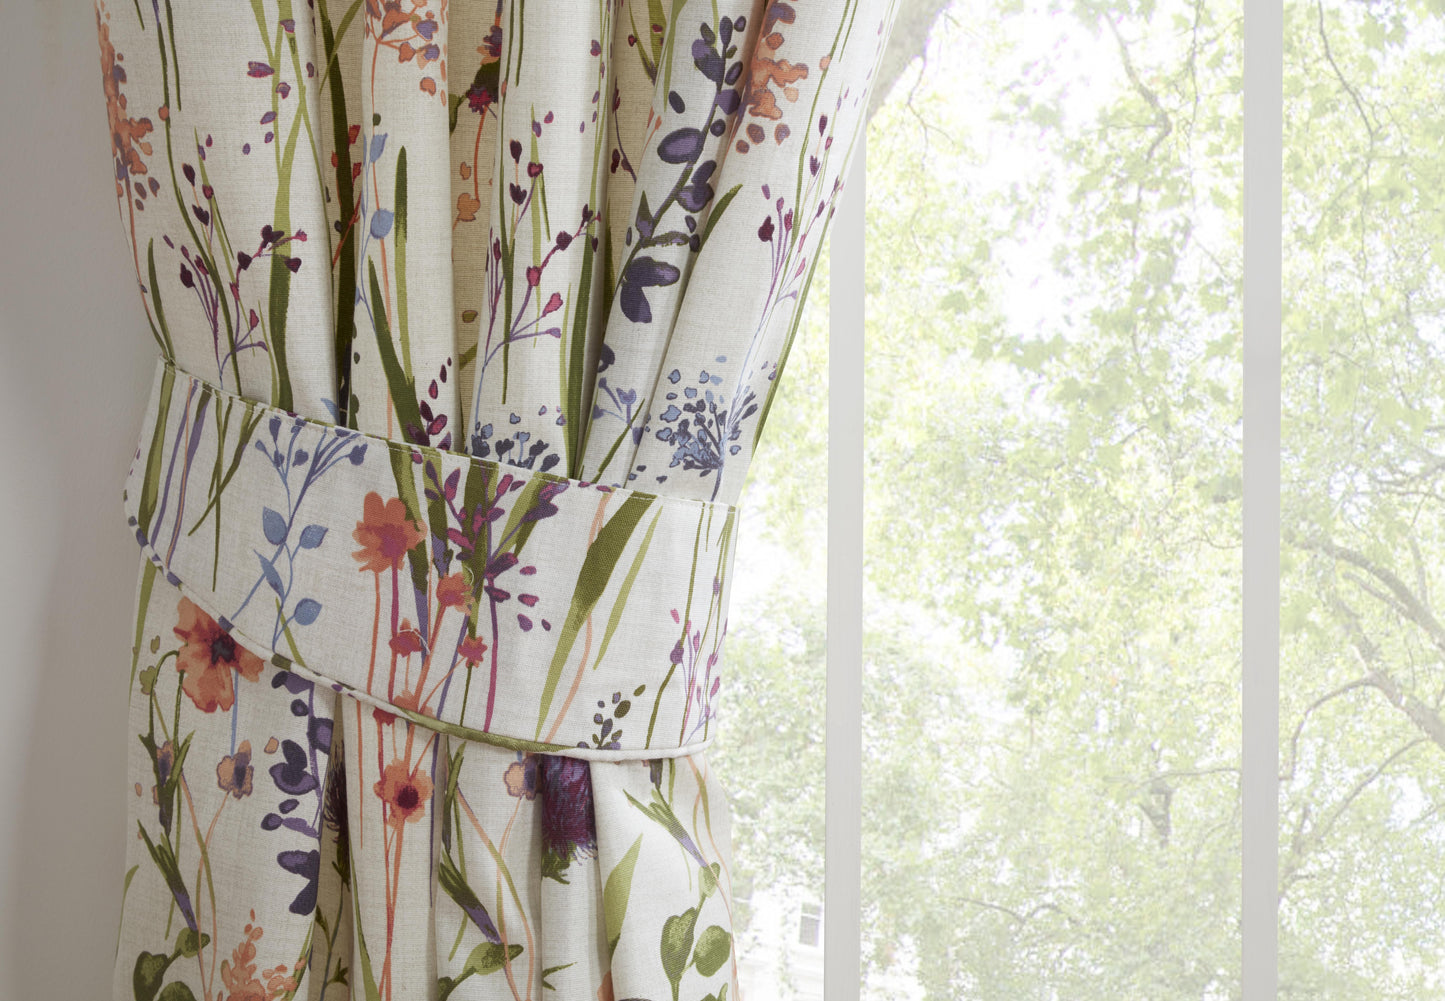 Hampshire Floral Design Bed Linen, Curtains in Multi